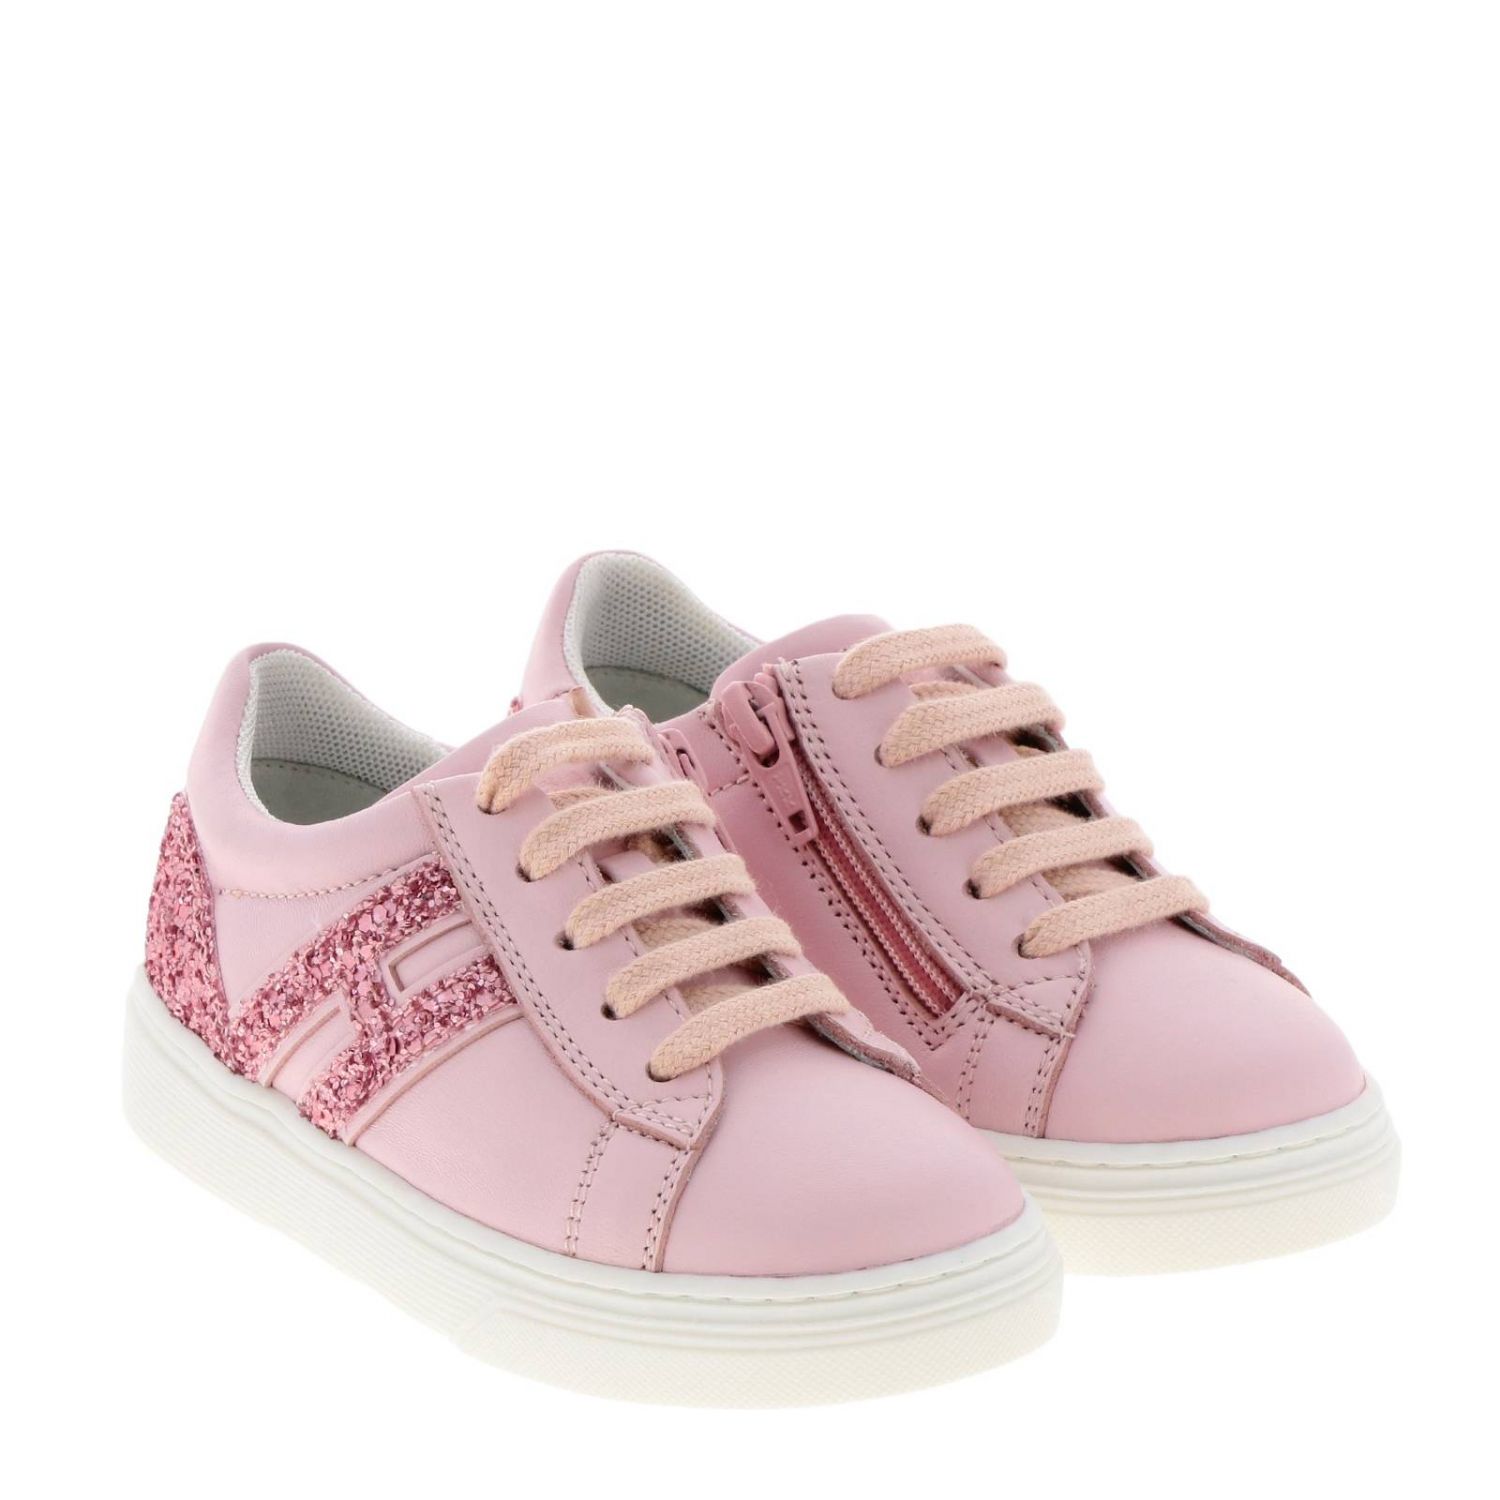 Hogan Baby Outlet: Shoes kids | Shoes Hogan Baby Kids Pink | Shoes ...